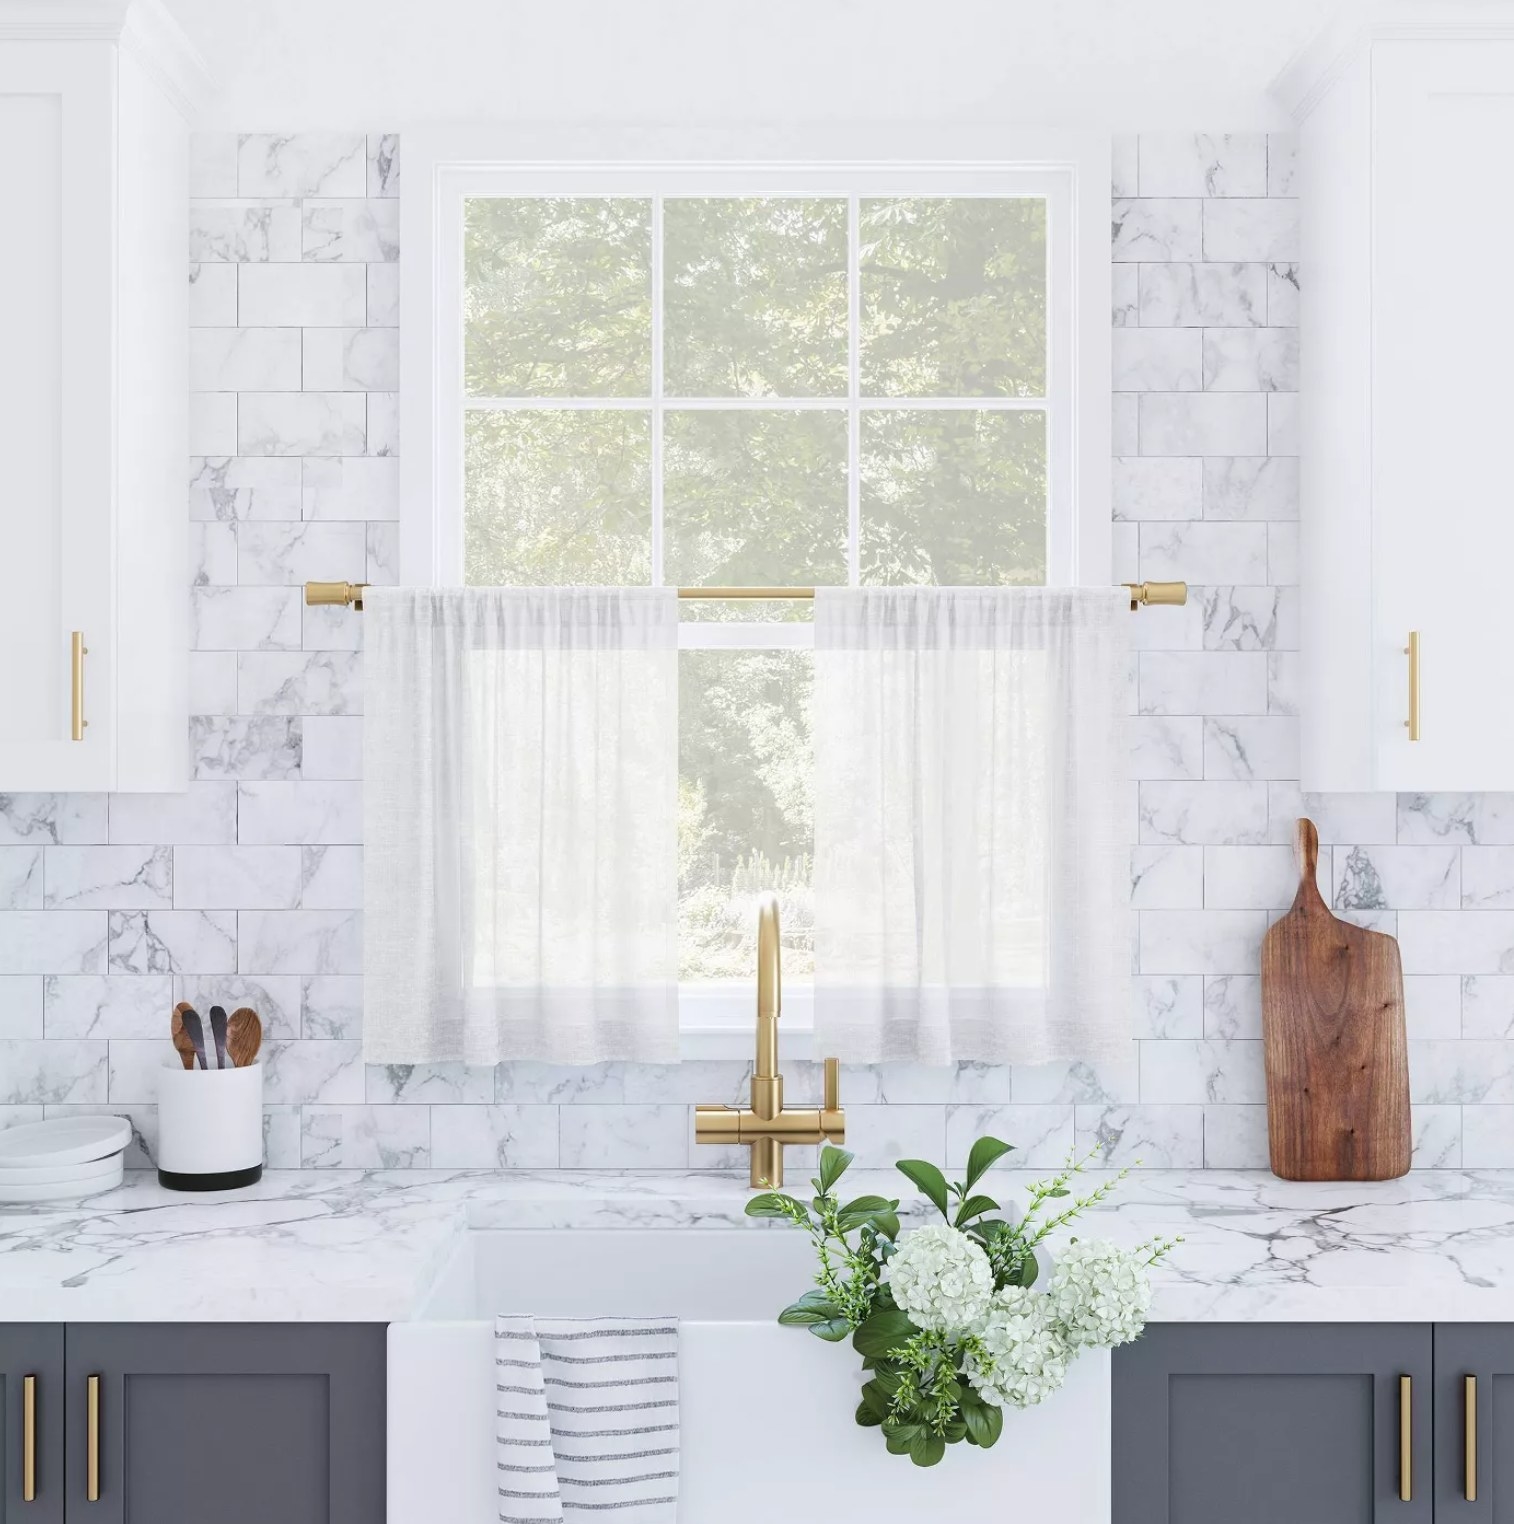 The white tiered curtains hanging in a kitchen window